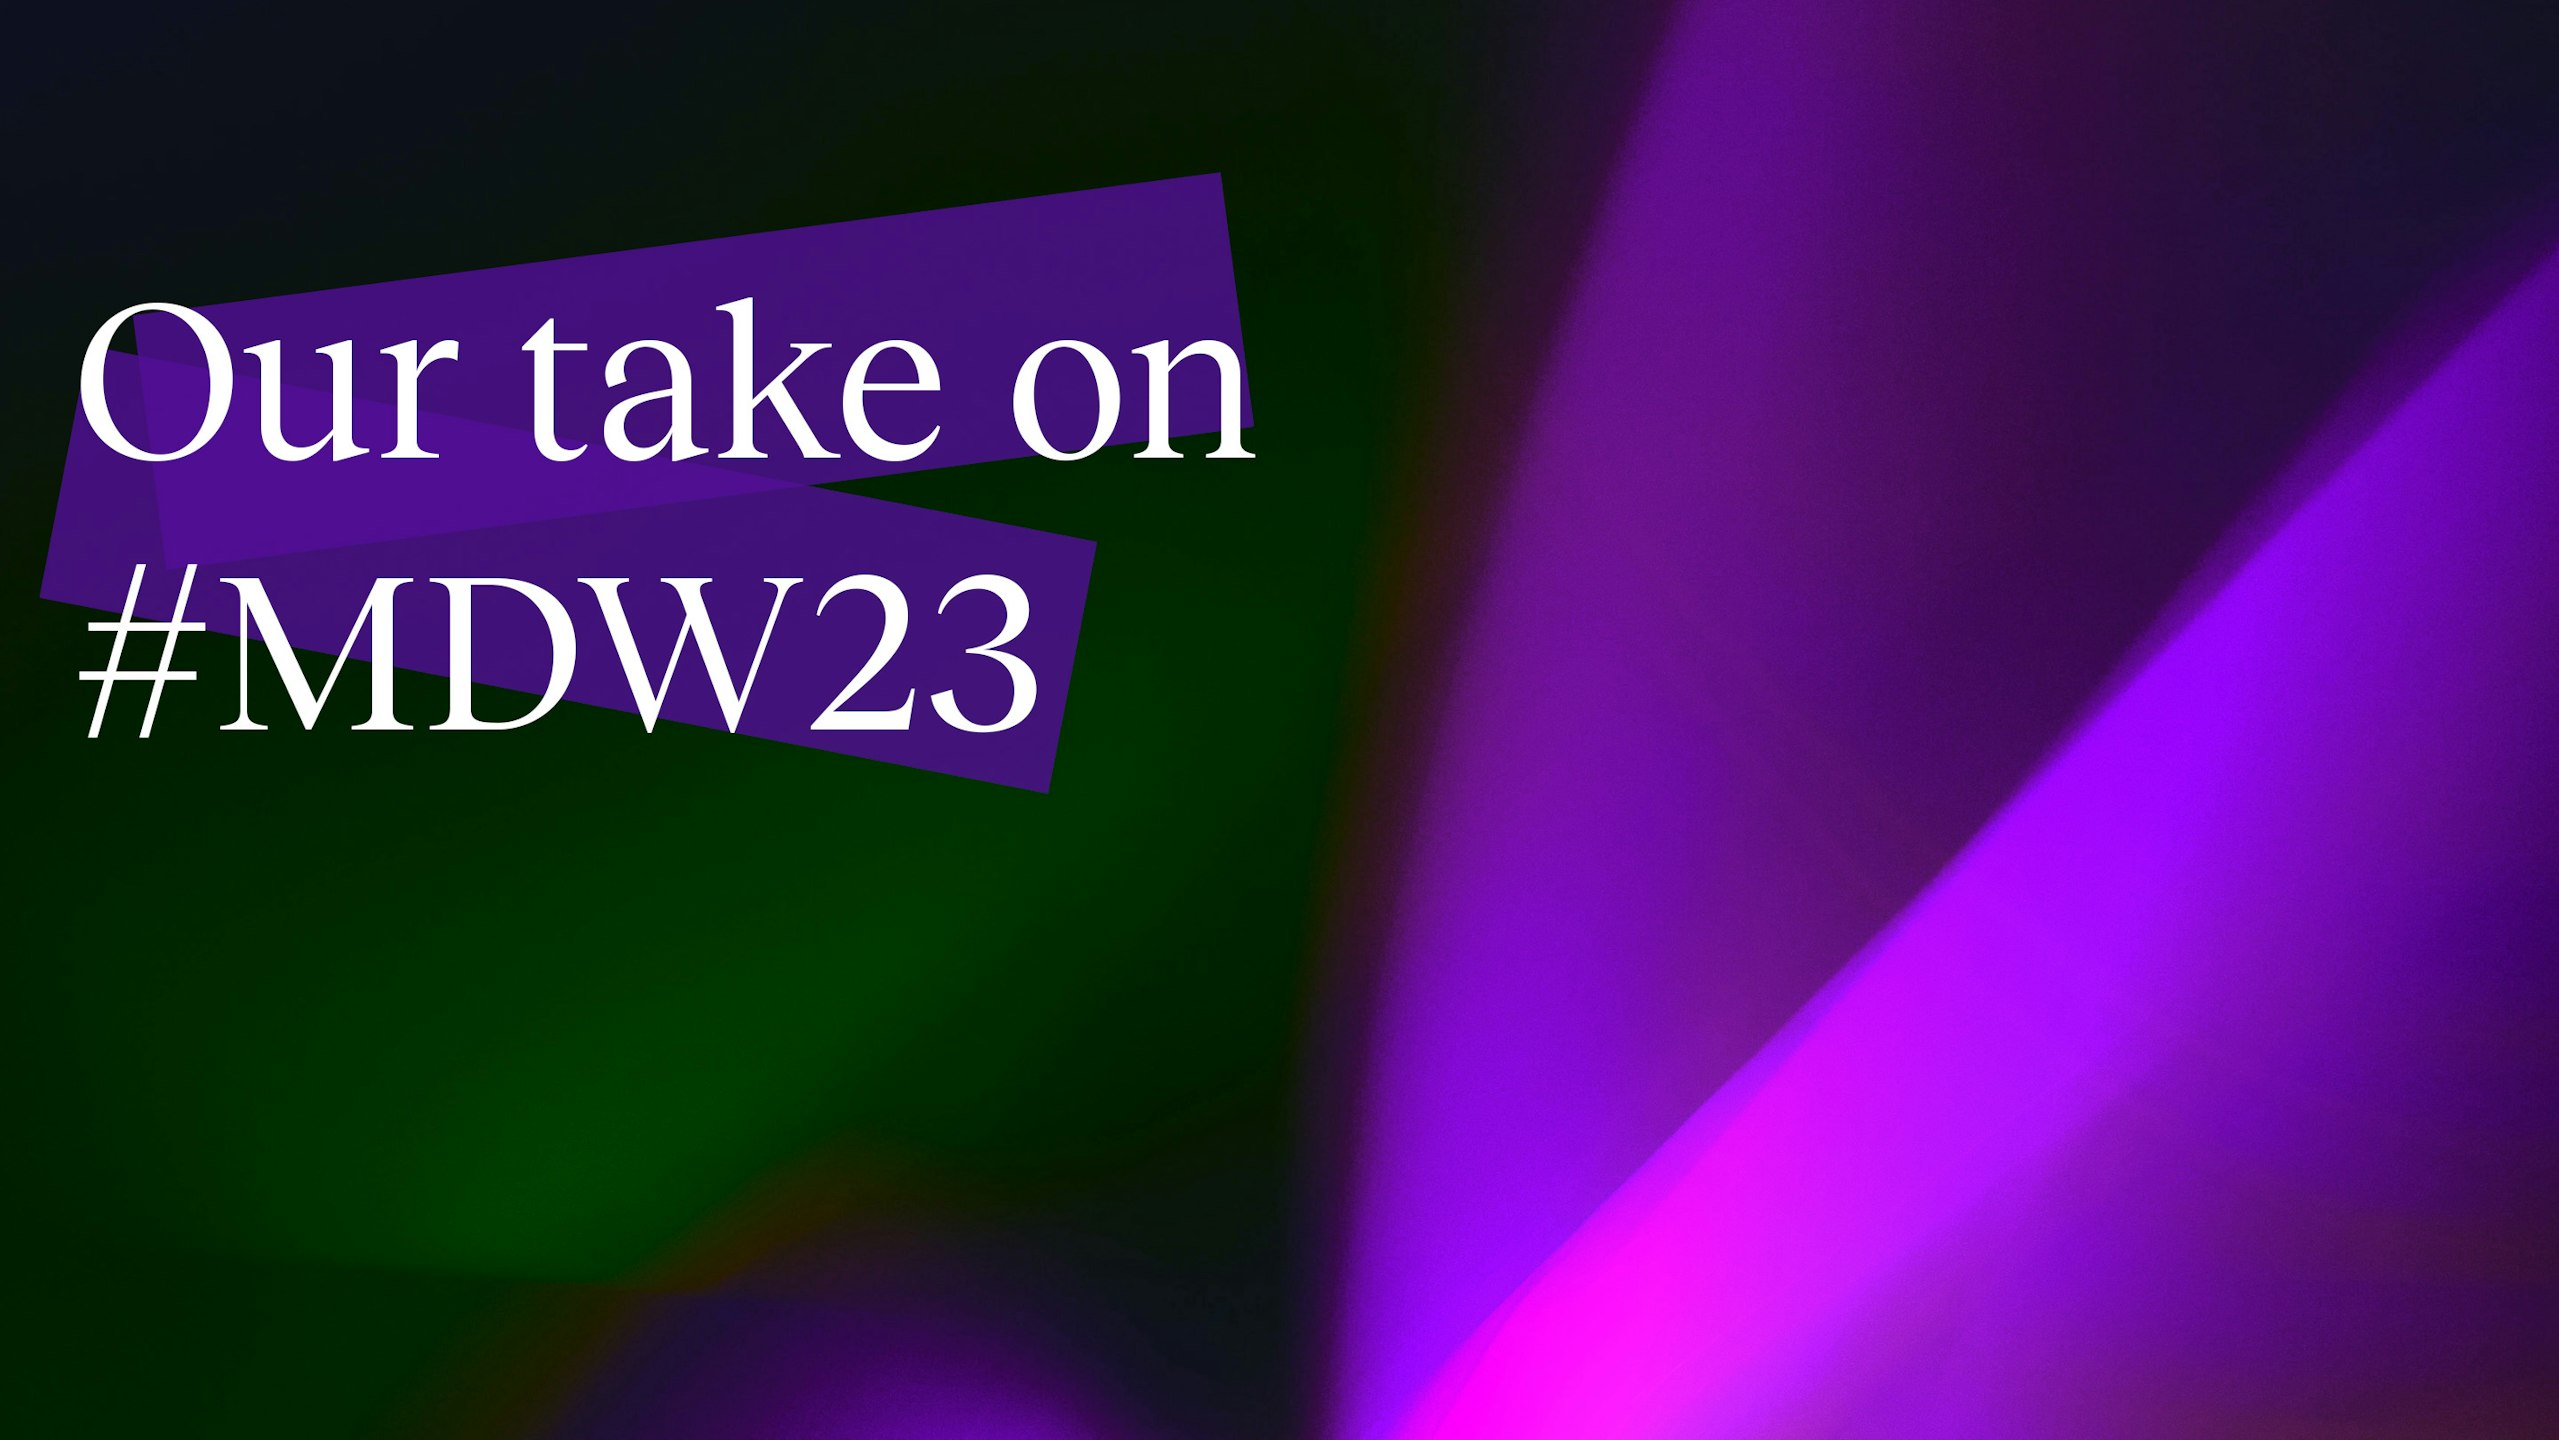 Text on abstract purple background saying Our take on #MDW23